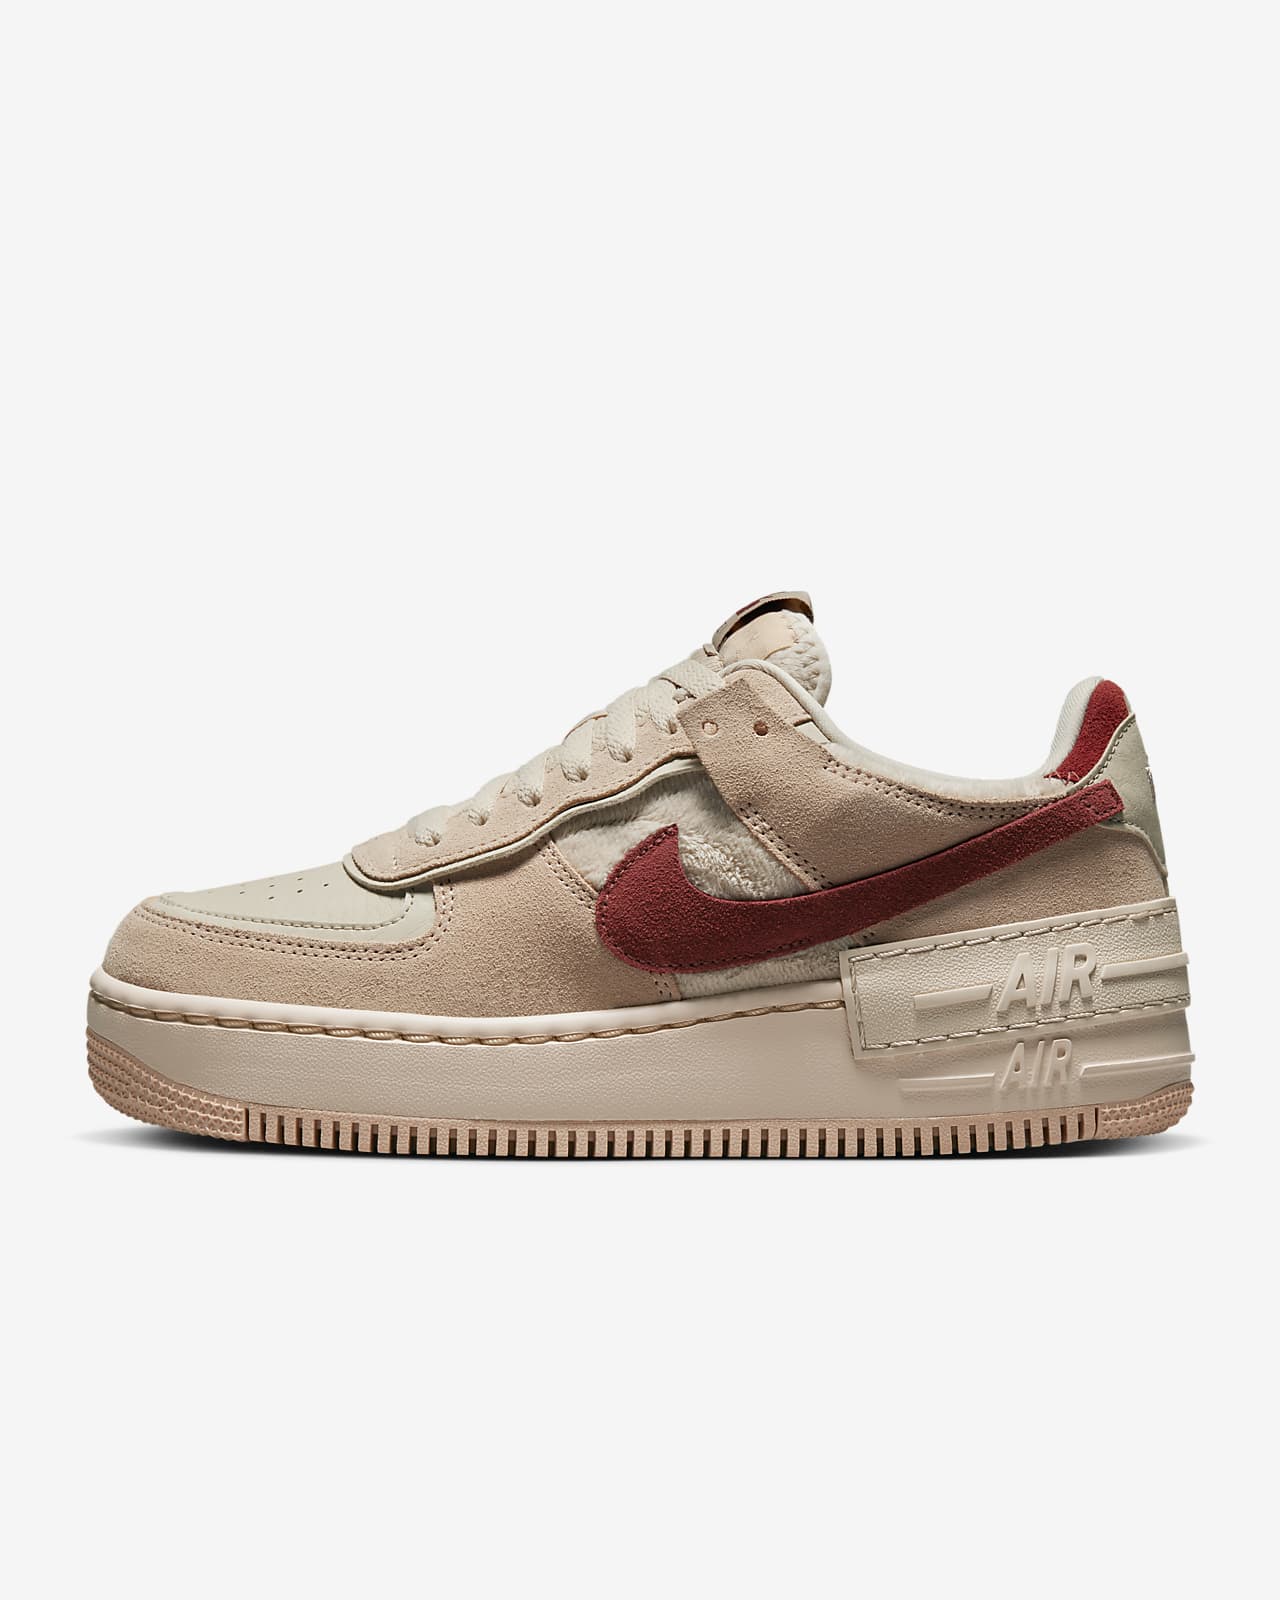 nike women's air force one shadow